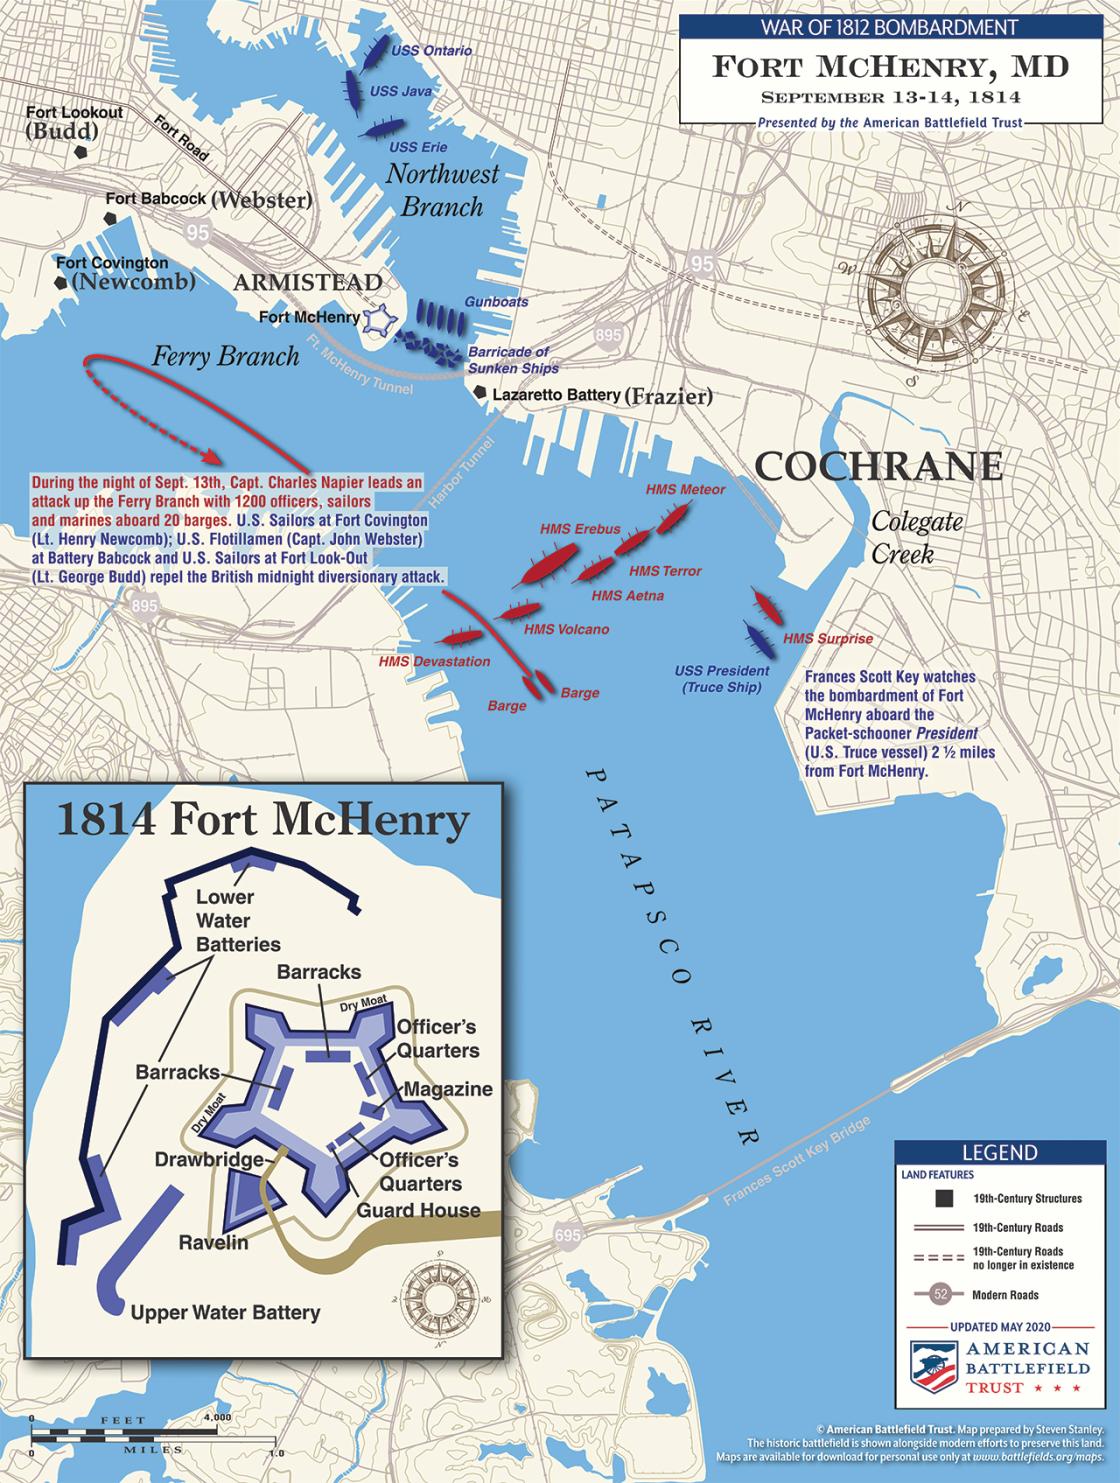 Bombardment of Fort McHenry | Sep 13-14, 1814 (May 2020)